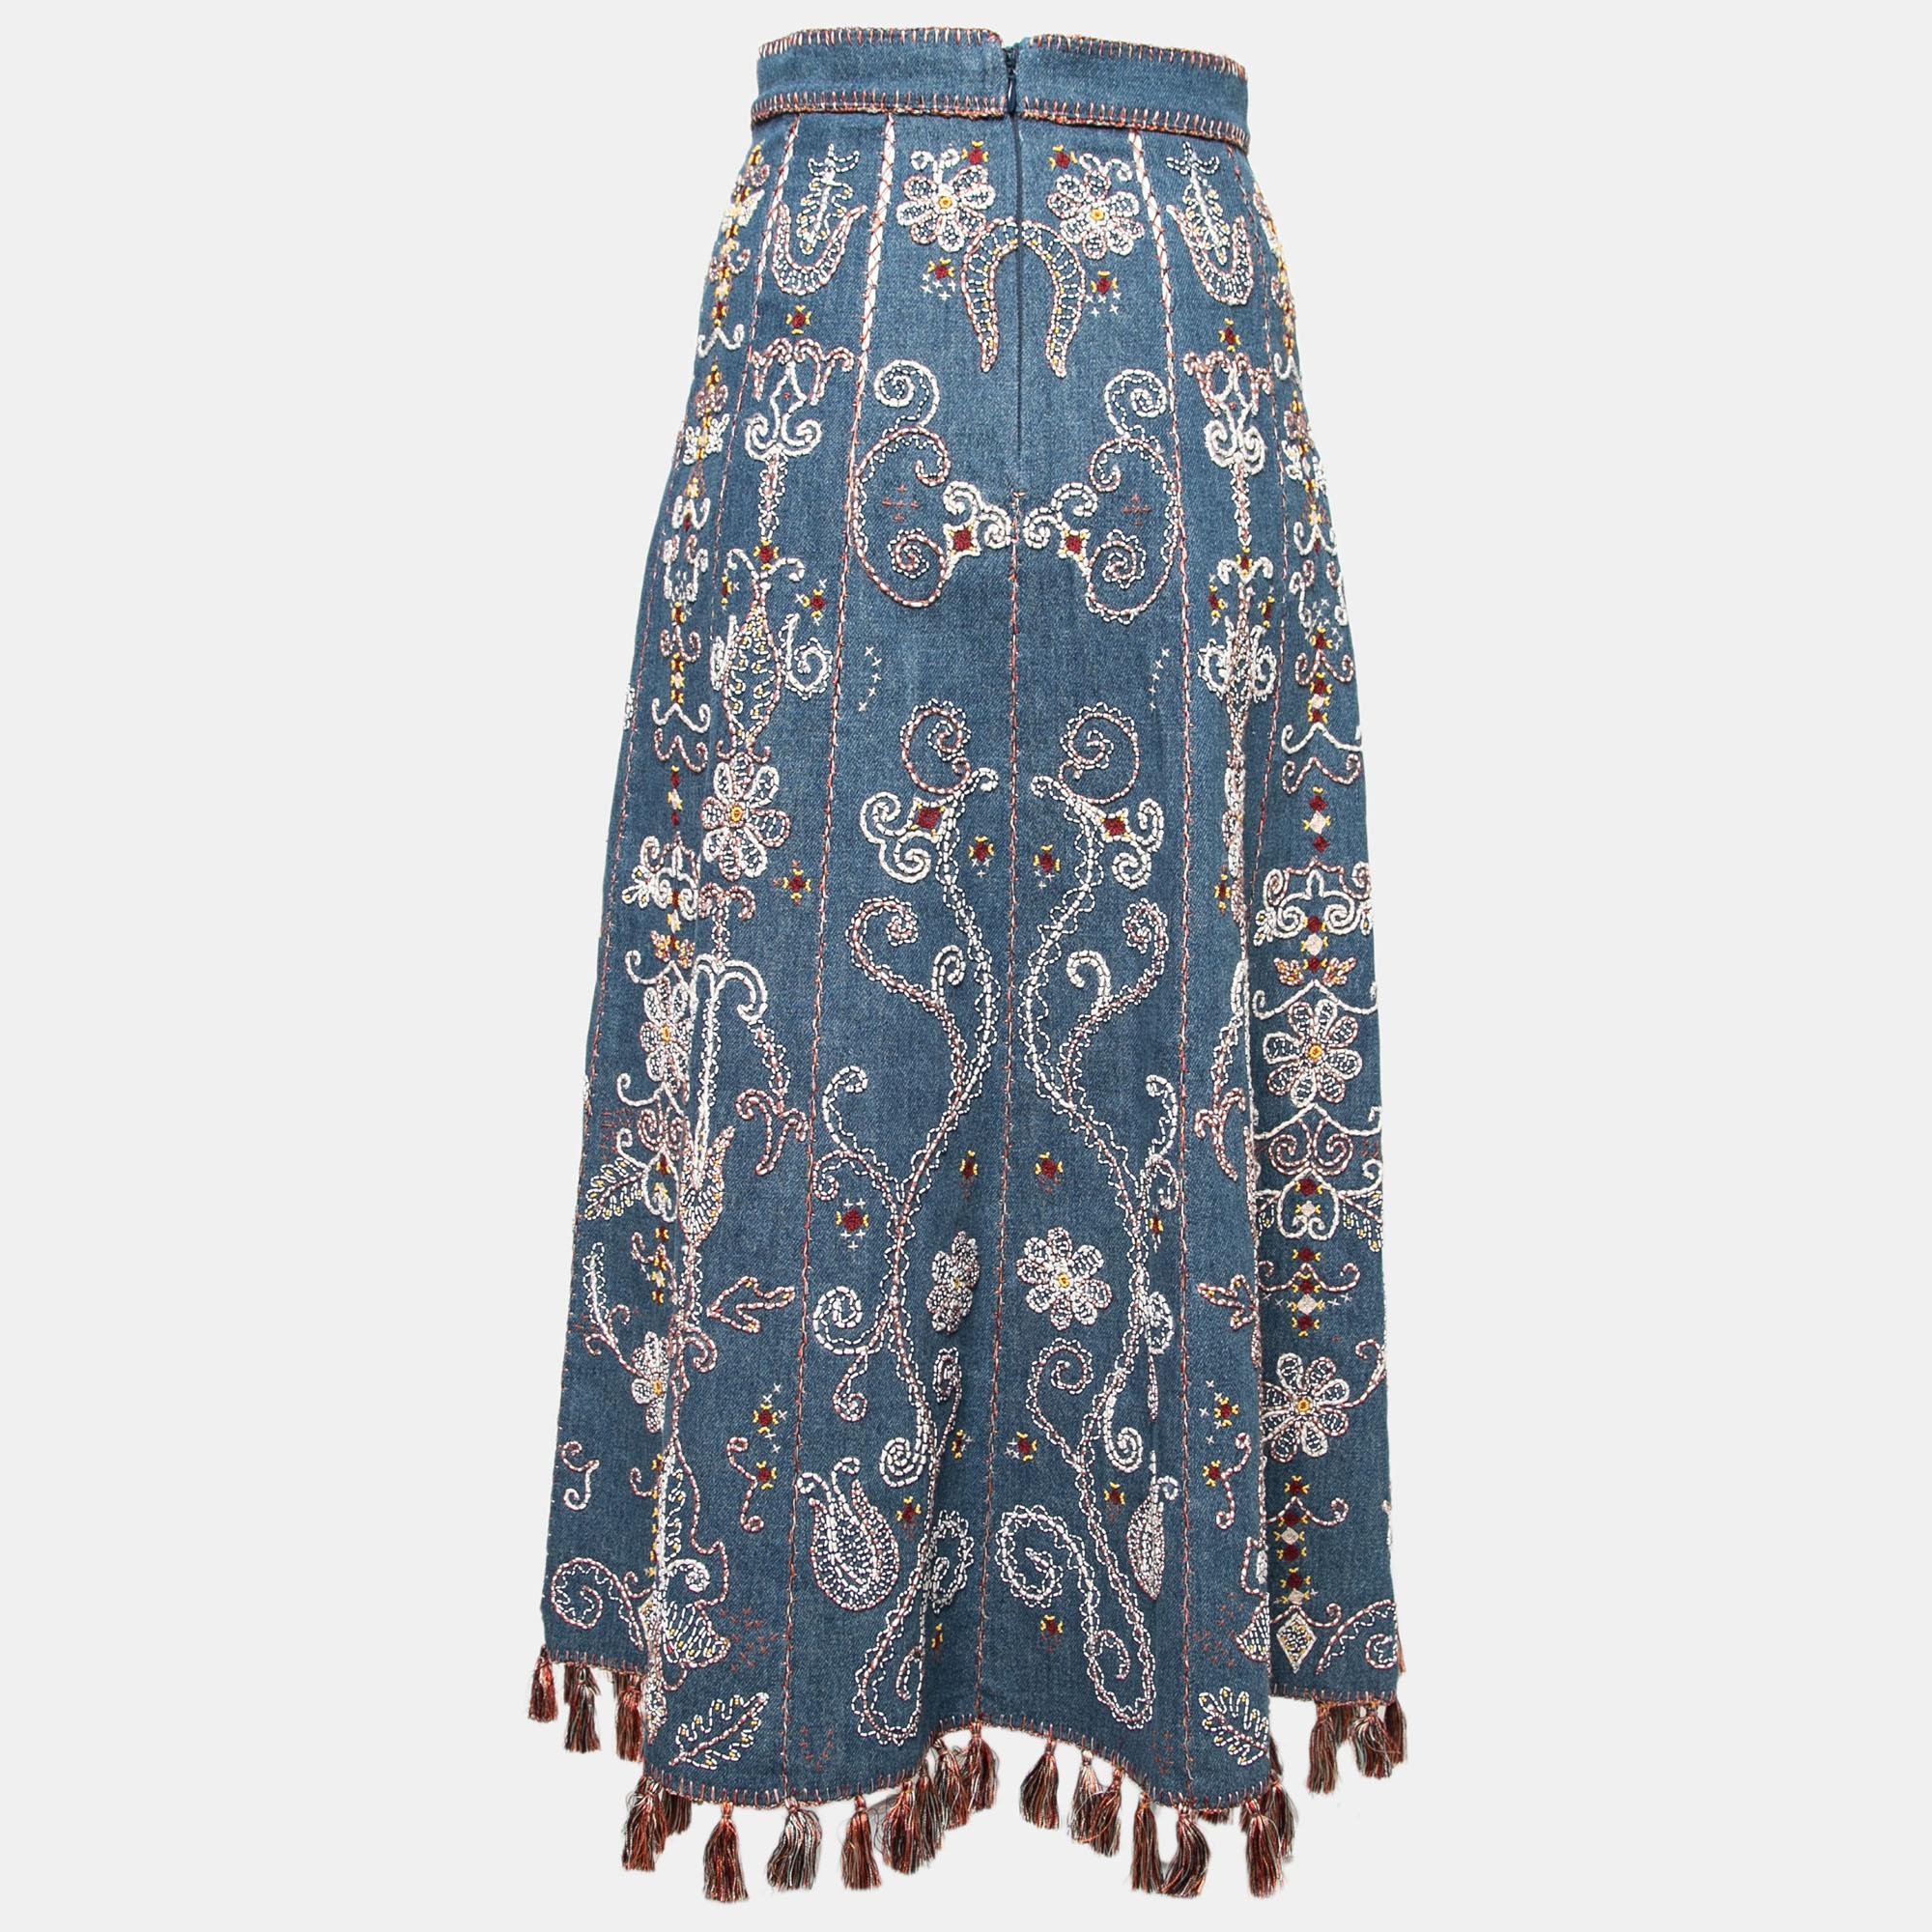 Exude a boho-chic vibe whenever you wear this skirt from the House of Dior. Augmented with beautiful hand embroidery and tassel trims, this skirt is cut from blue denim fabric and equipped with a zipper for fastening. Complement this Dior skirt with